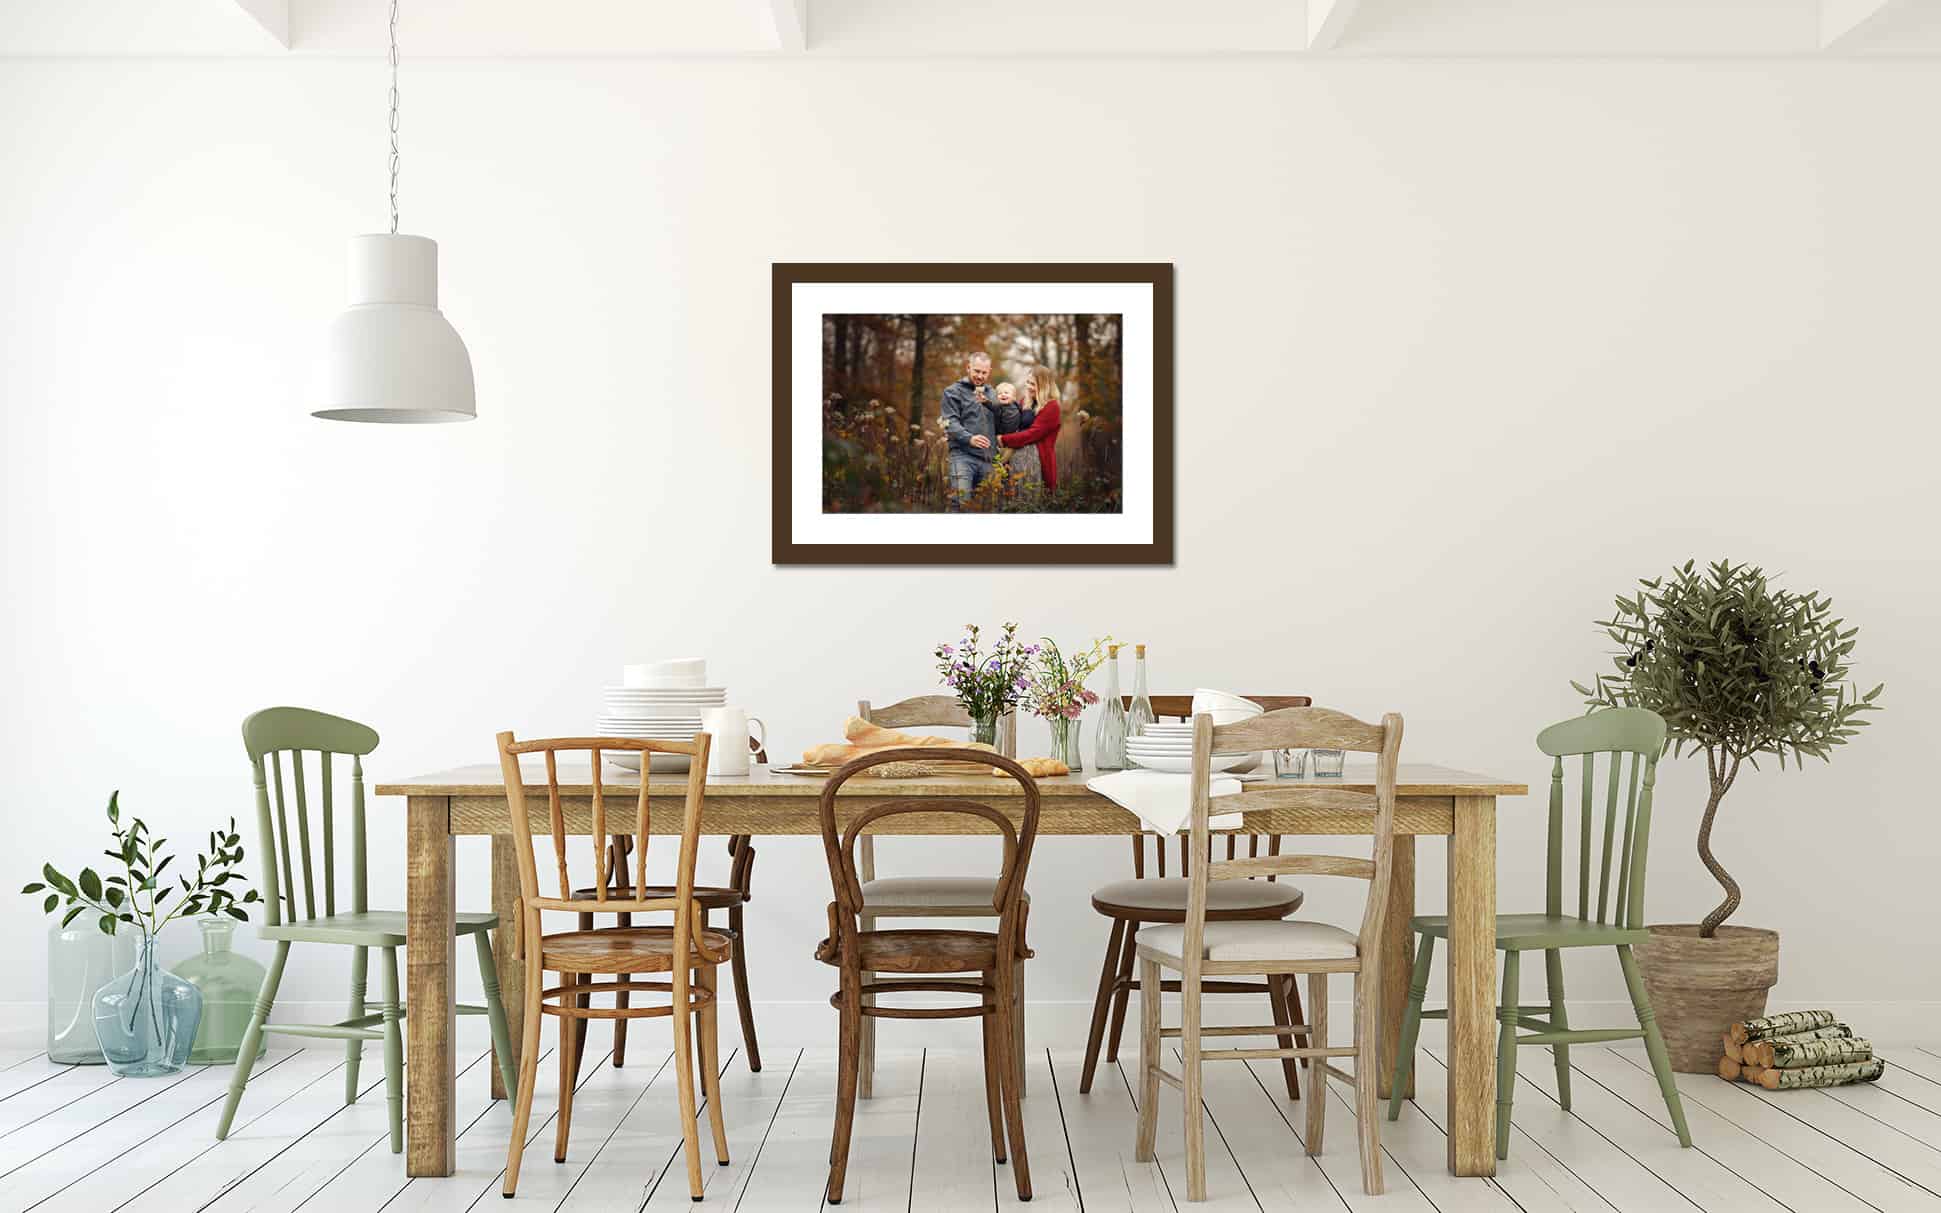 kitchen with image on wall